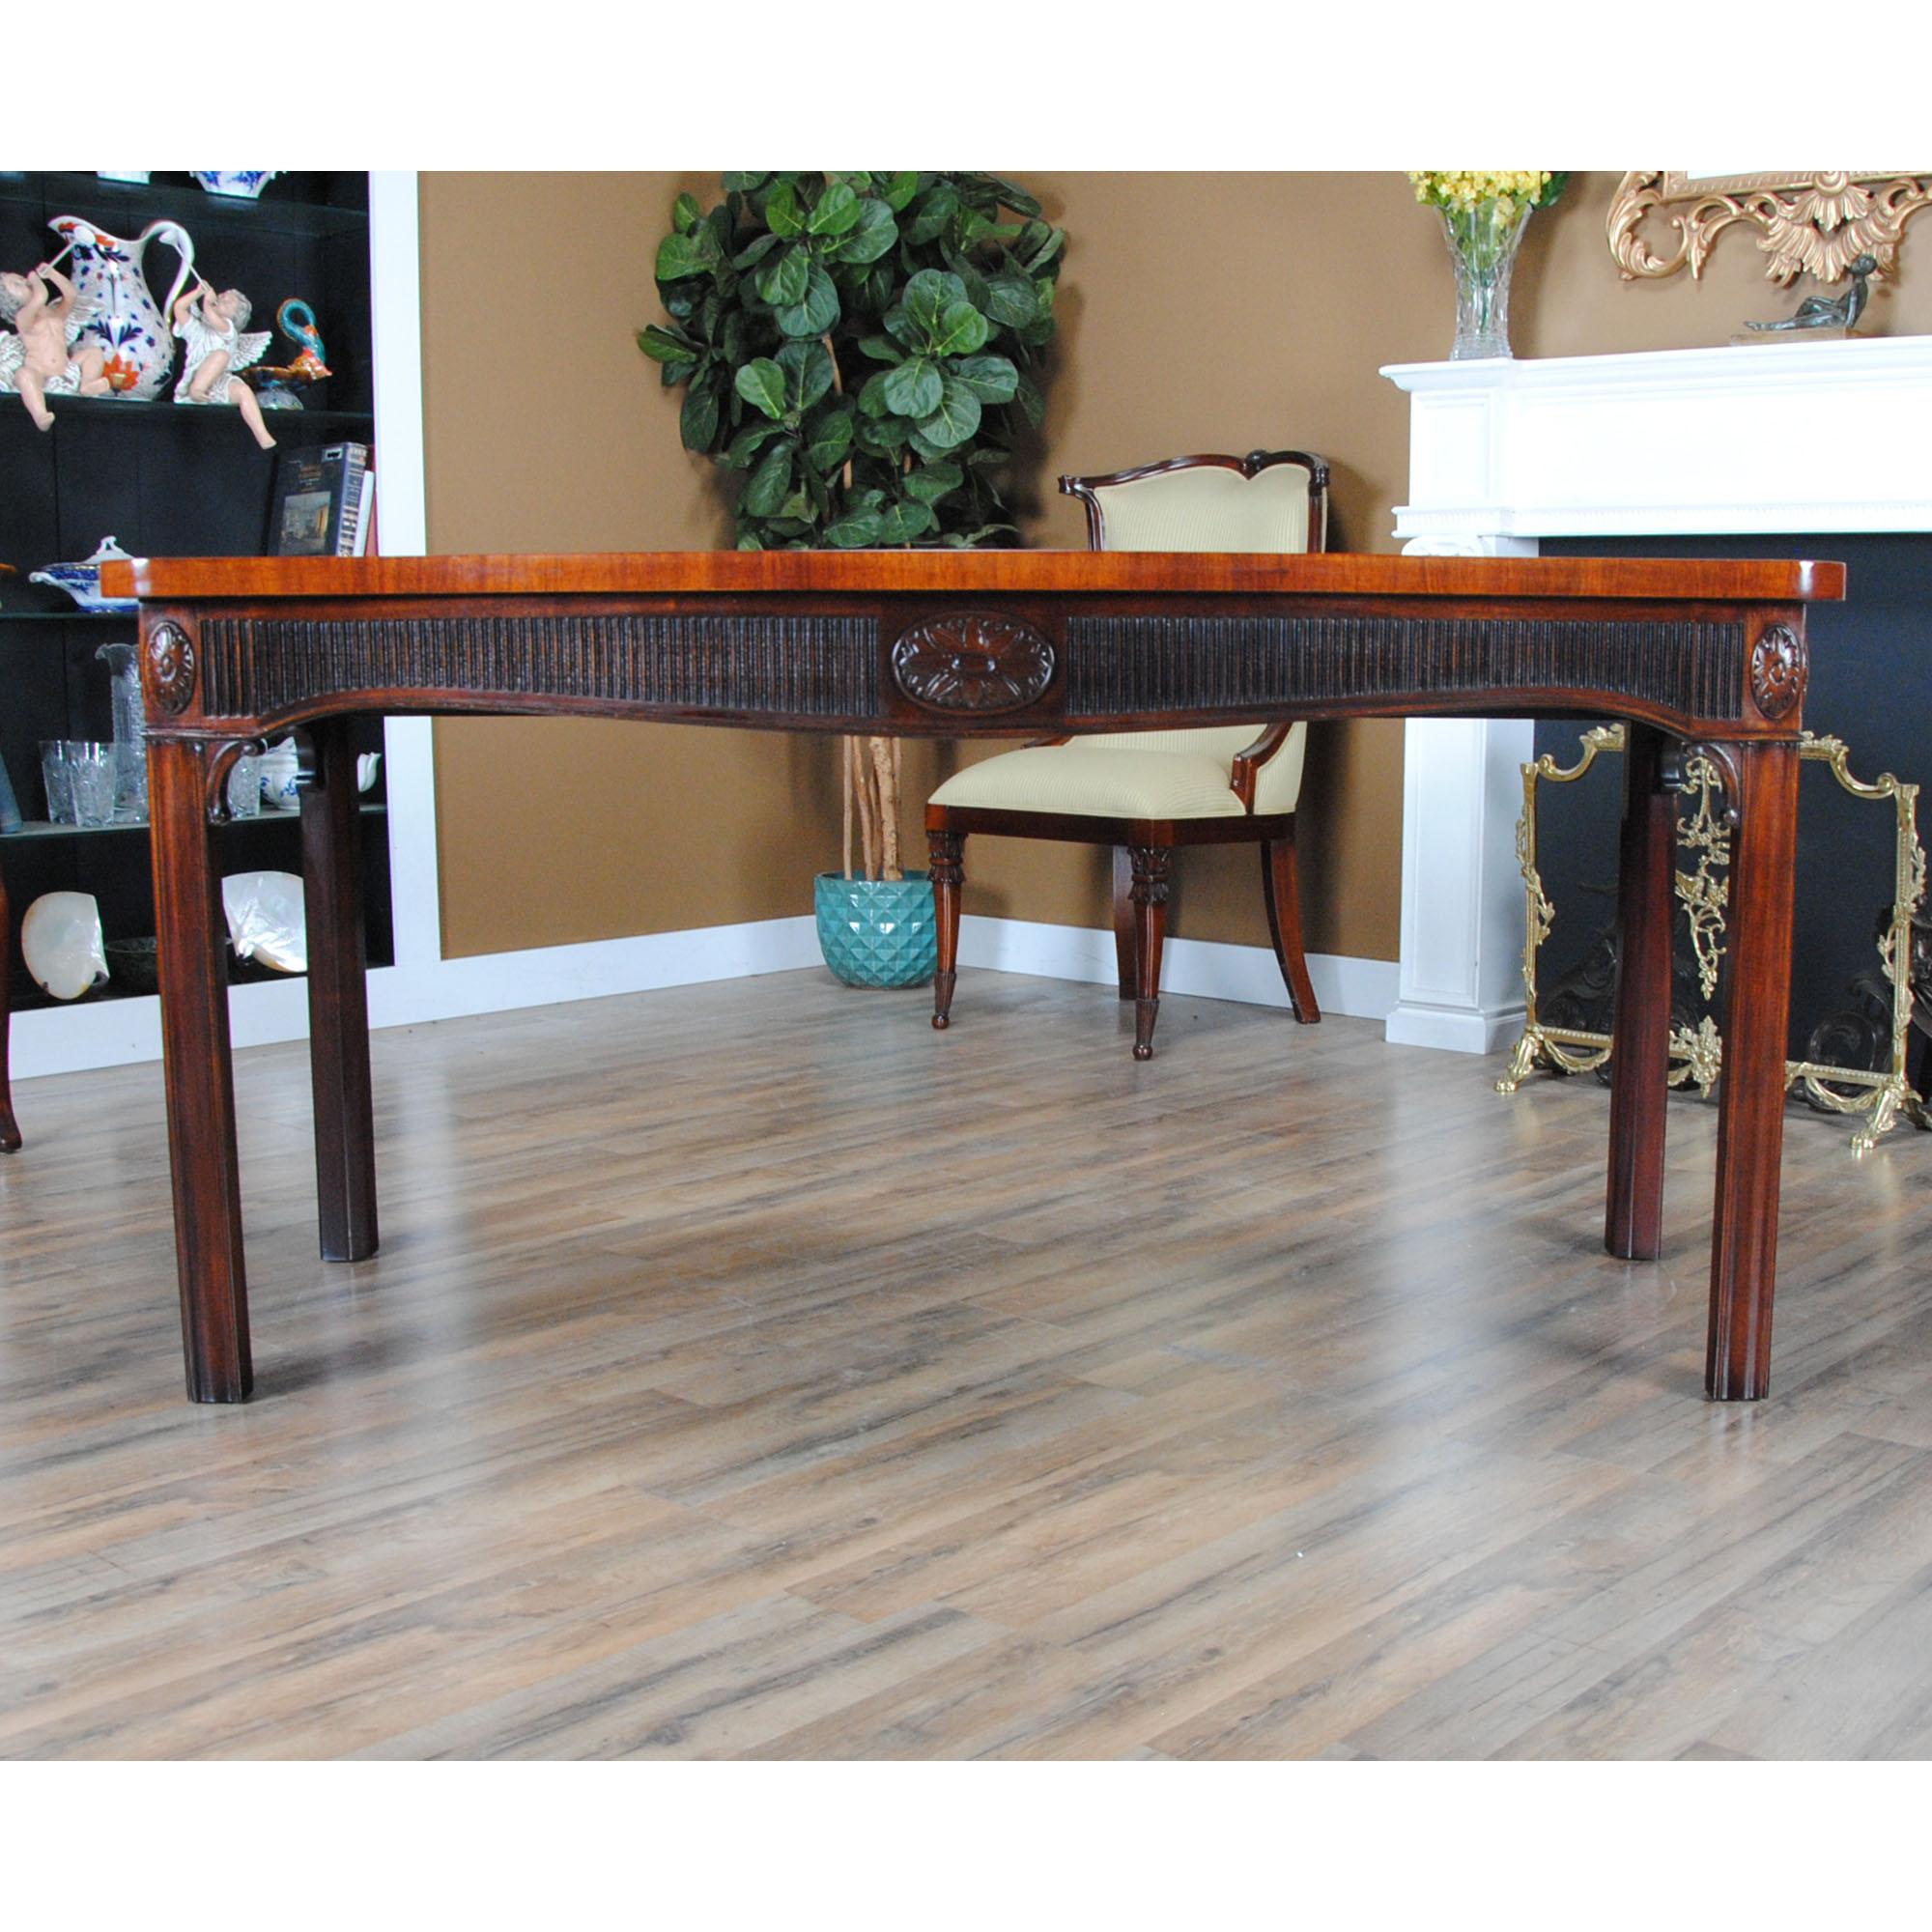 The absolute highest quality piece of American furniture production is exemplified in this Vintage Kittinger Mahogany Console. From the recently French polished top to the base of the sturdy and beautifully shaped legs everything here works together